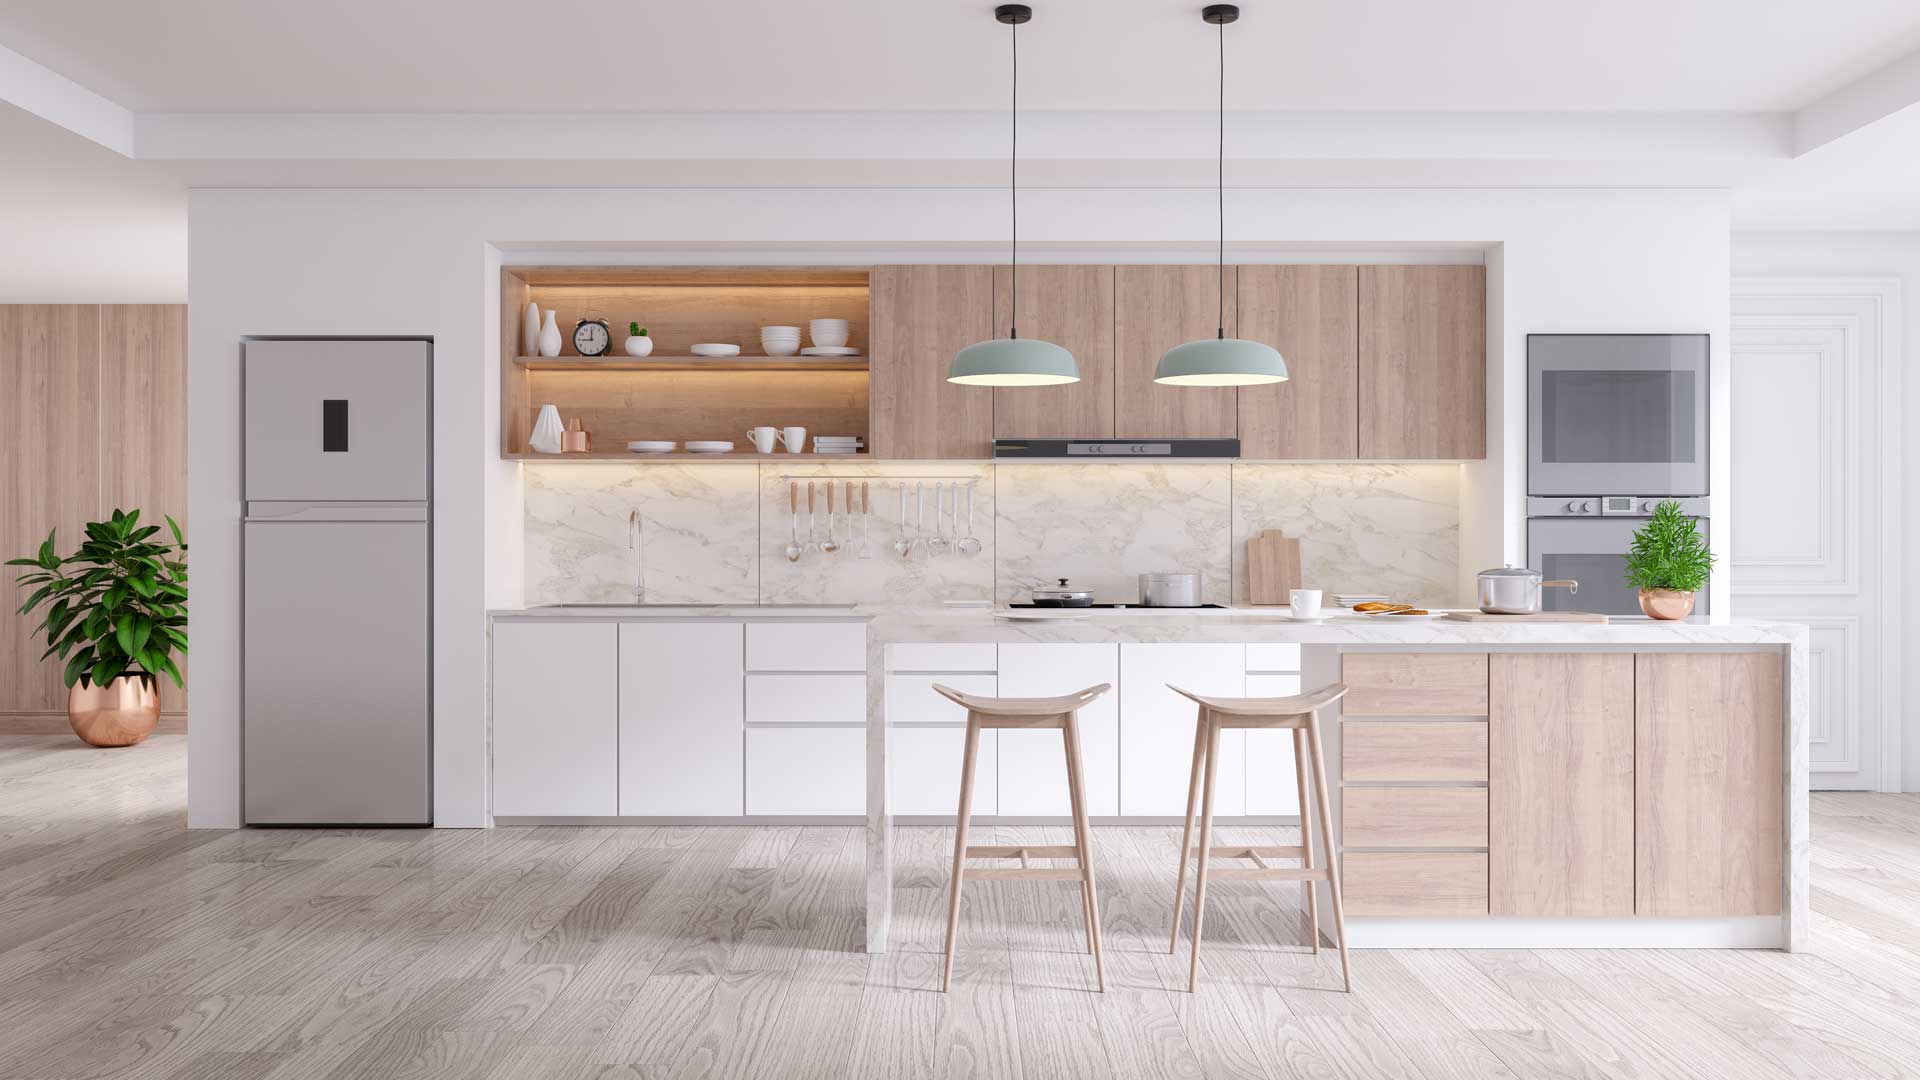 A modern kitchen with all white cabinets